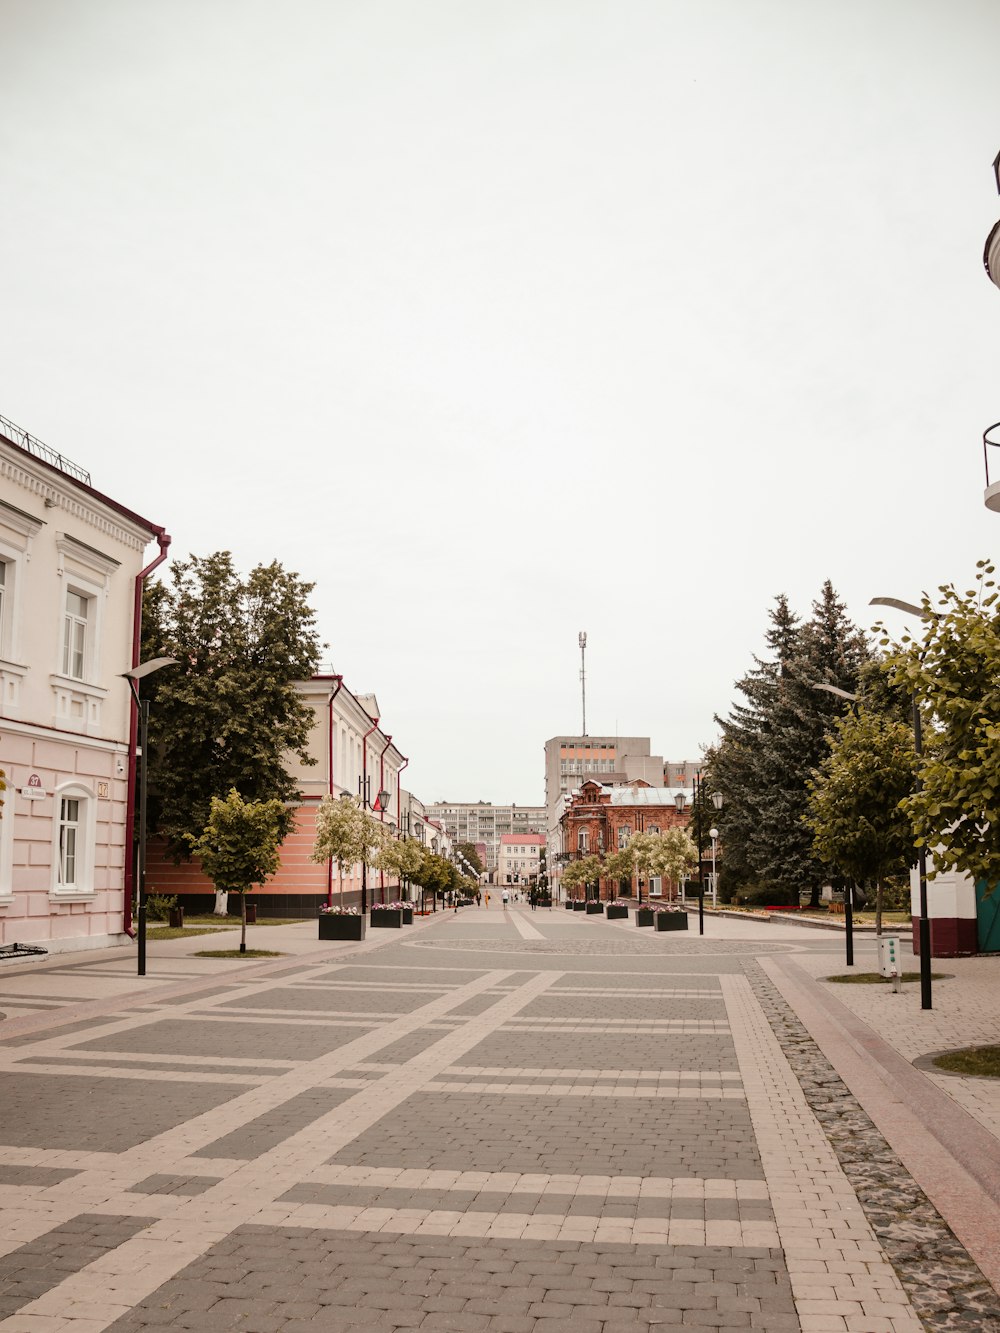 an empty street with a clock tower in the distance